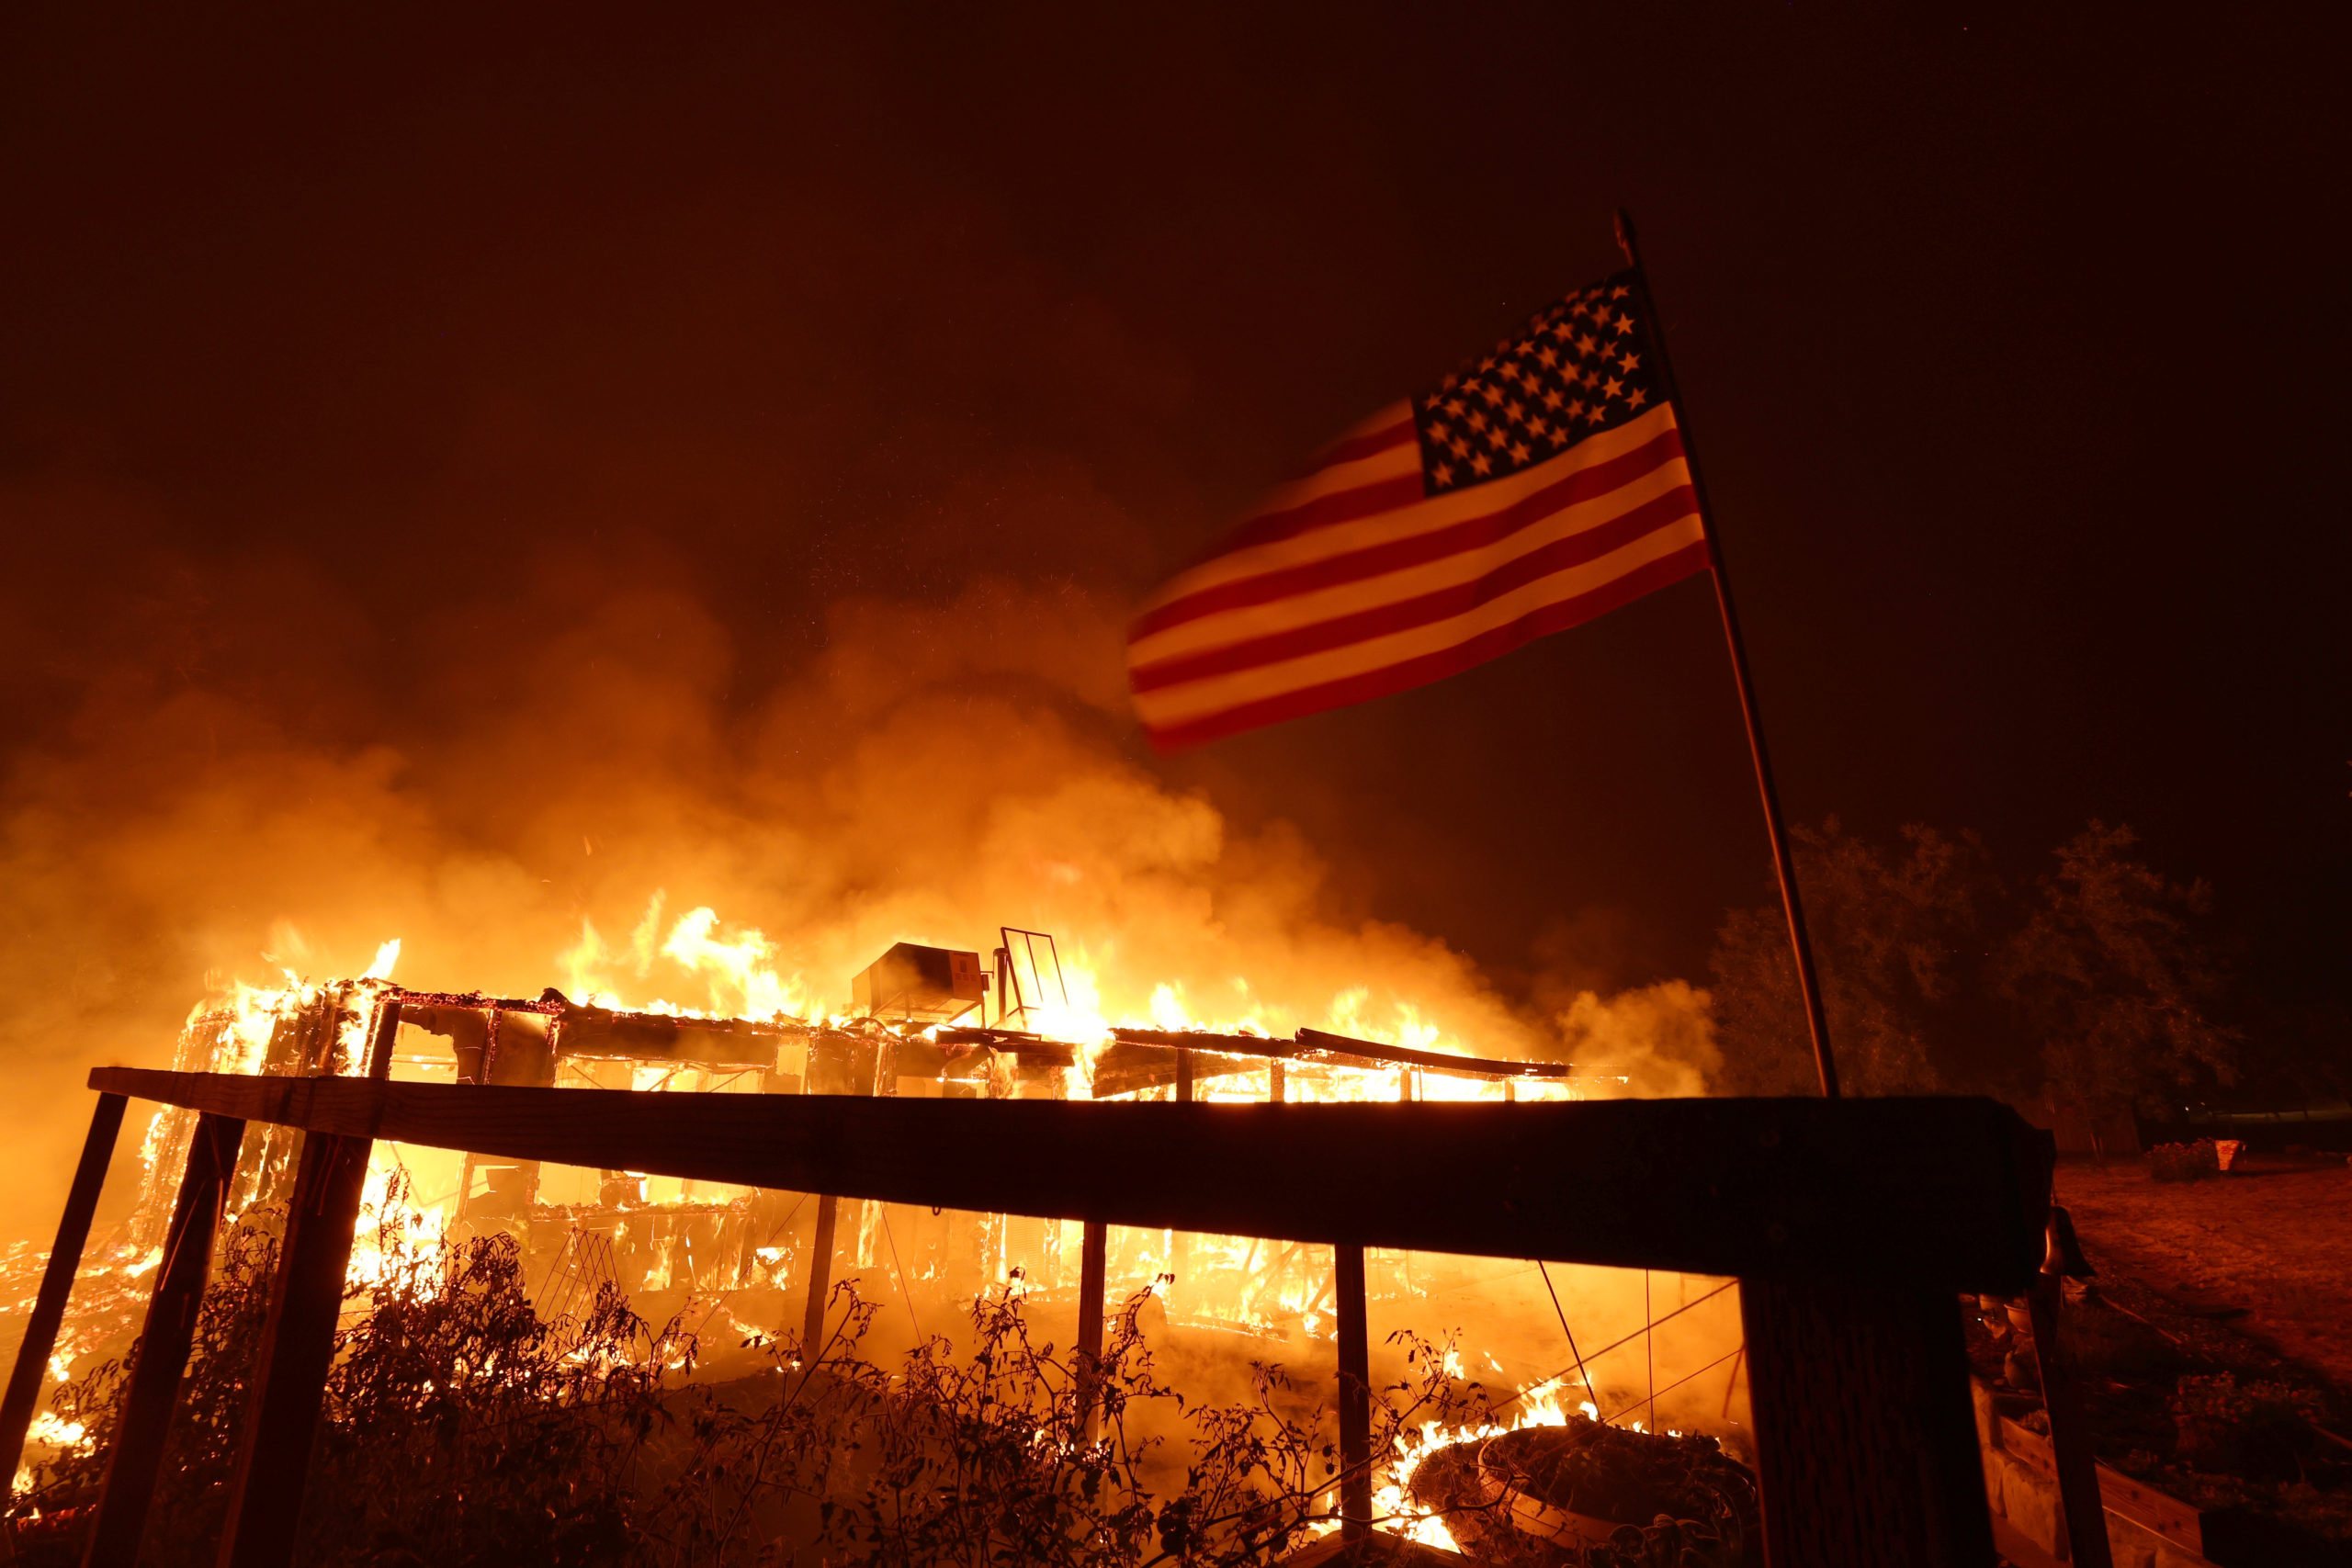 MARIPOSA, CALIFORNIA - JULY 23: A home burns as the Oak Fire moves through the area on July 23, 2022 near Mariposa, California. The fast moving Oak Fire burning outside of Yosemite National Park has forced evacuations, charred over 4500 acres and has destroyed several homes since starting on Friday afternoon. (Photo by Justin Sullivan/Getty Images)